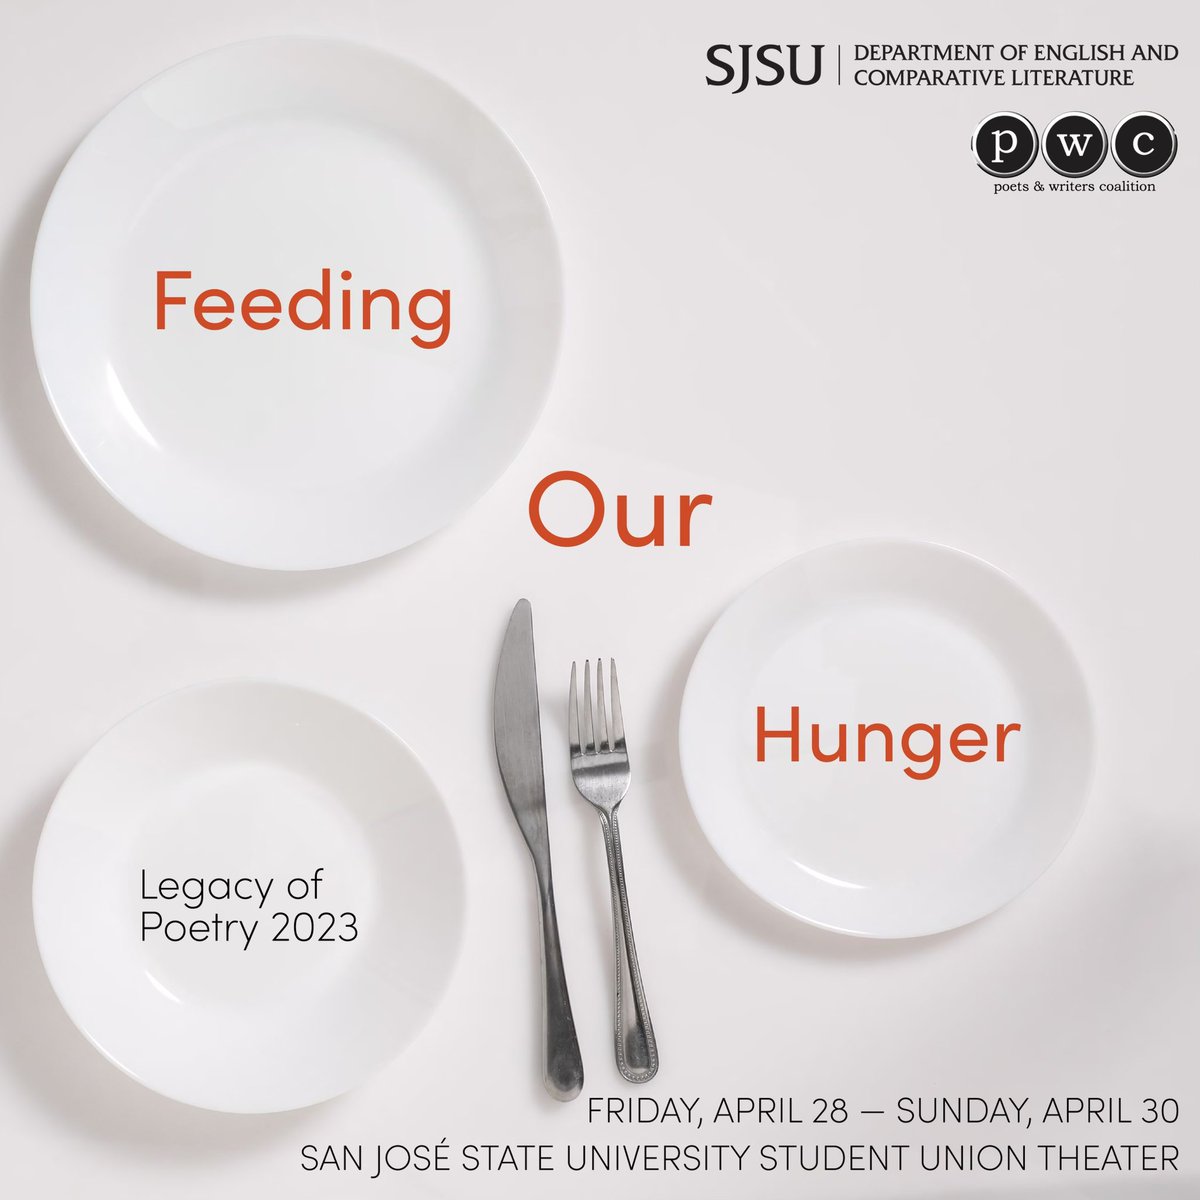 This event is coming soon! Stay tuned for more event details & click this link to reserve a spot to this FREE event!💻

sjsu.edu/legacyofpoetry…

#poetryfestival
#LOP23 #FeedingOurHungerwithPoetry
#SJSULegacyofPoetry
#SJEvent